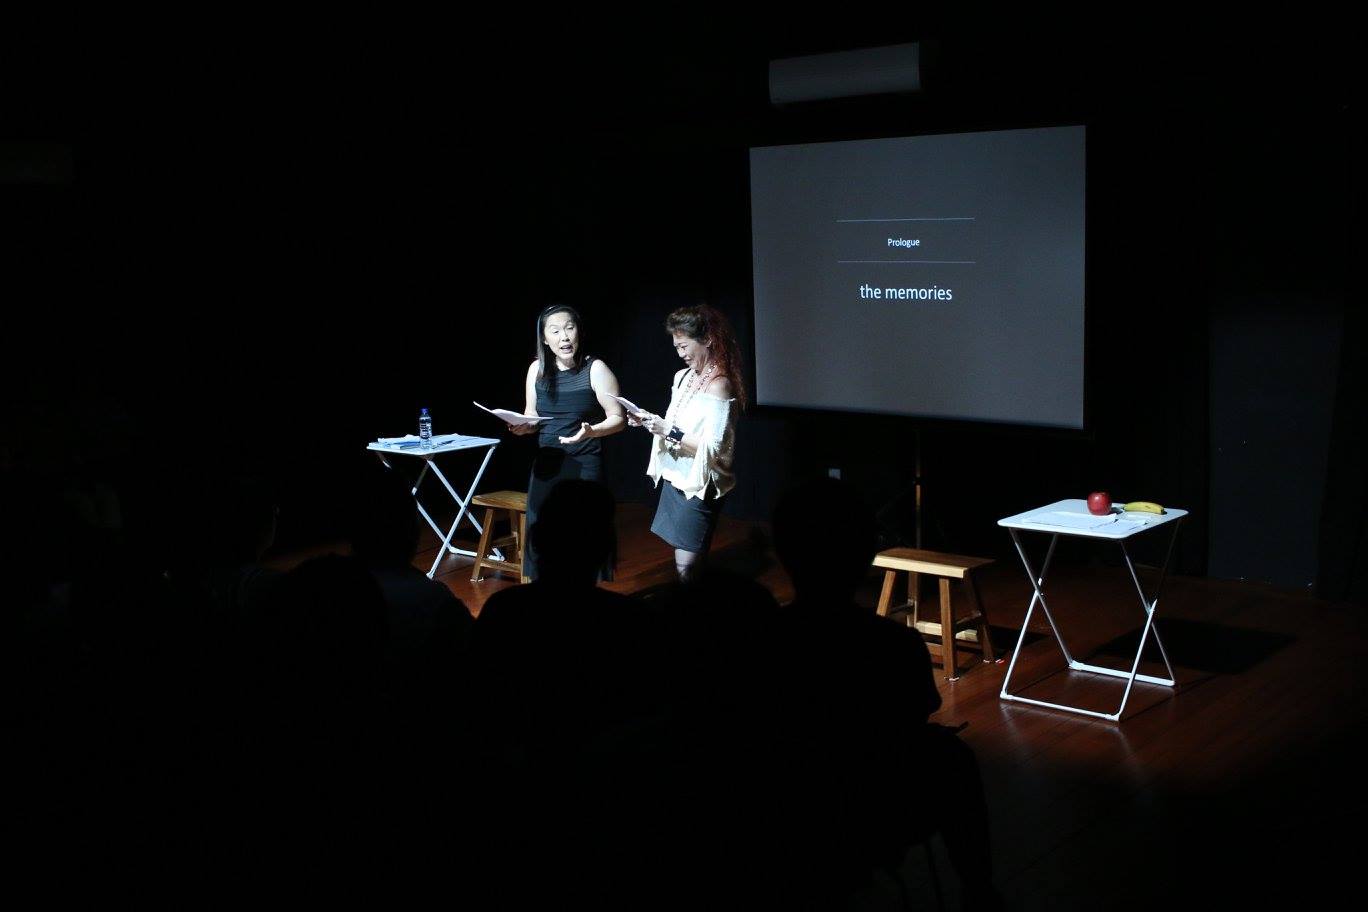 Actresses Serene Chen and Zelda Tatiana Ng on stage performing the piece. There is a screen in the background with the text 'Prologue the memories".